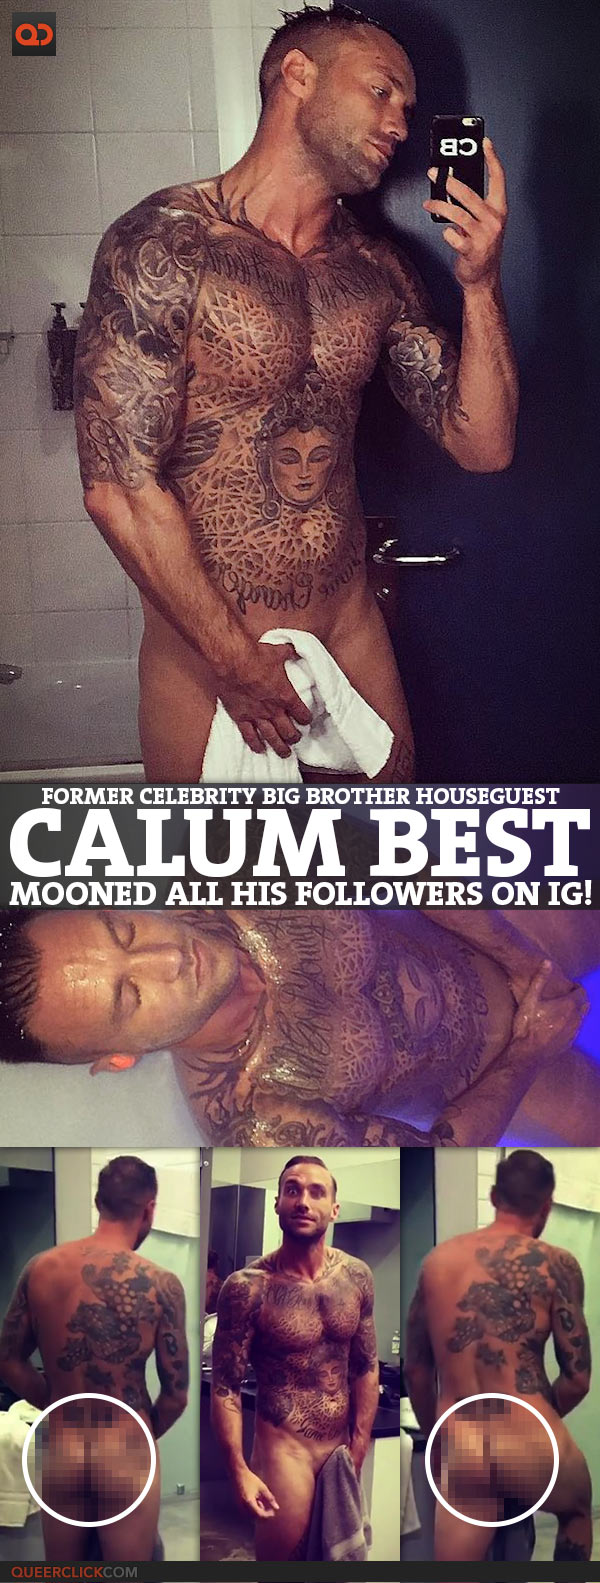 Calum Best, Former Celebrity Big Brother Houseguest, Mooned All His Followers On IG!